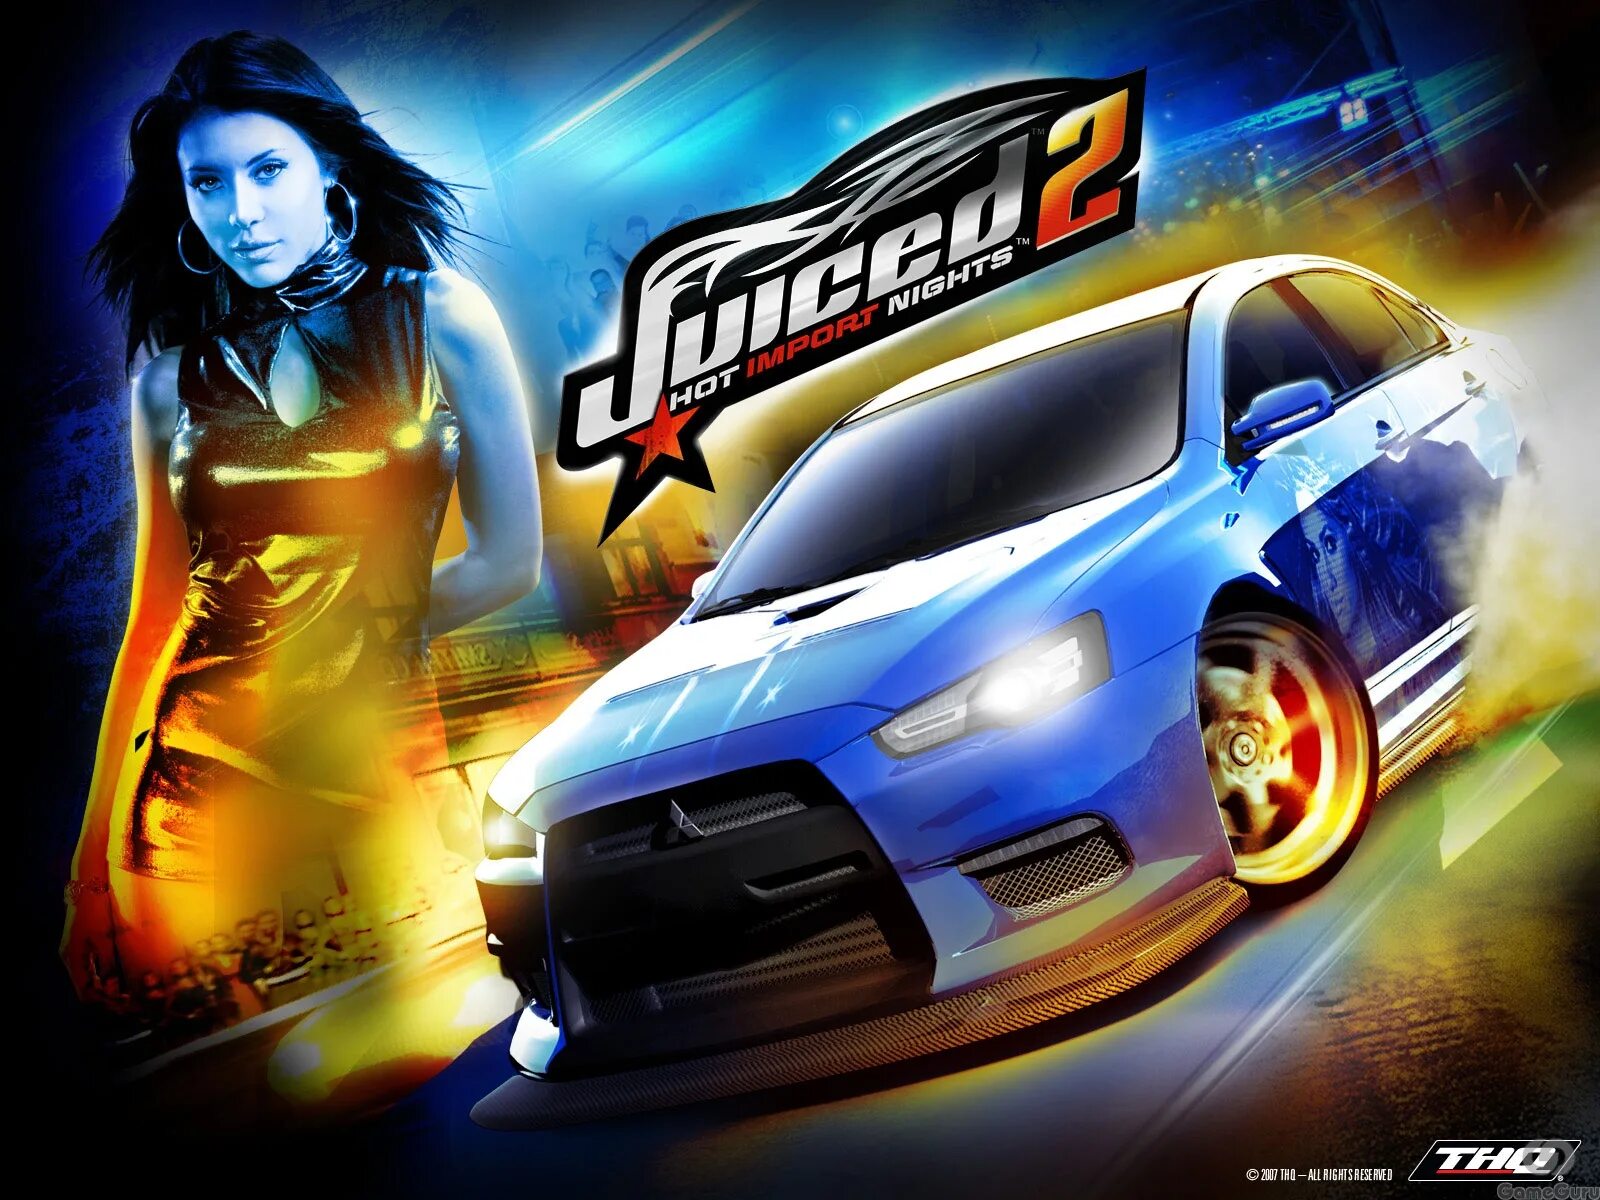 Juiced Xbox 360. Juiced 2 Xbox 360. Гонка Juiced 2. Juiced 2 ps3. Hot 2 game